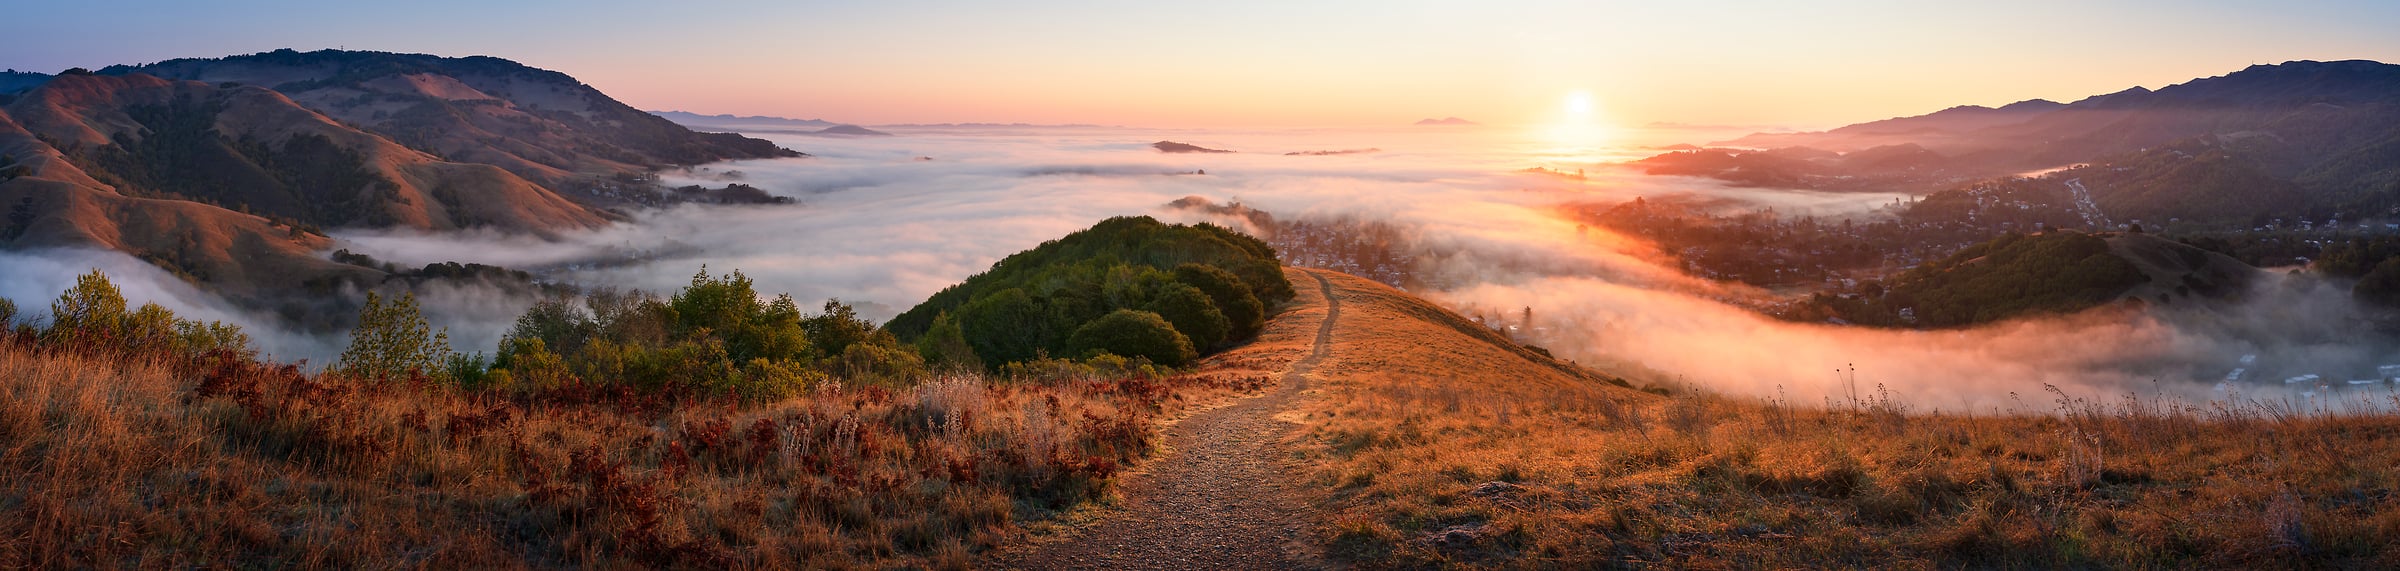 181 megapixels! A very high resolution, large-format VAST photo print of an inspirational pathway down a hill towards sunset with fog in a valley; panorama photograph created by Jeff Lewis in Marin County, California.